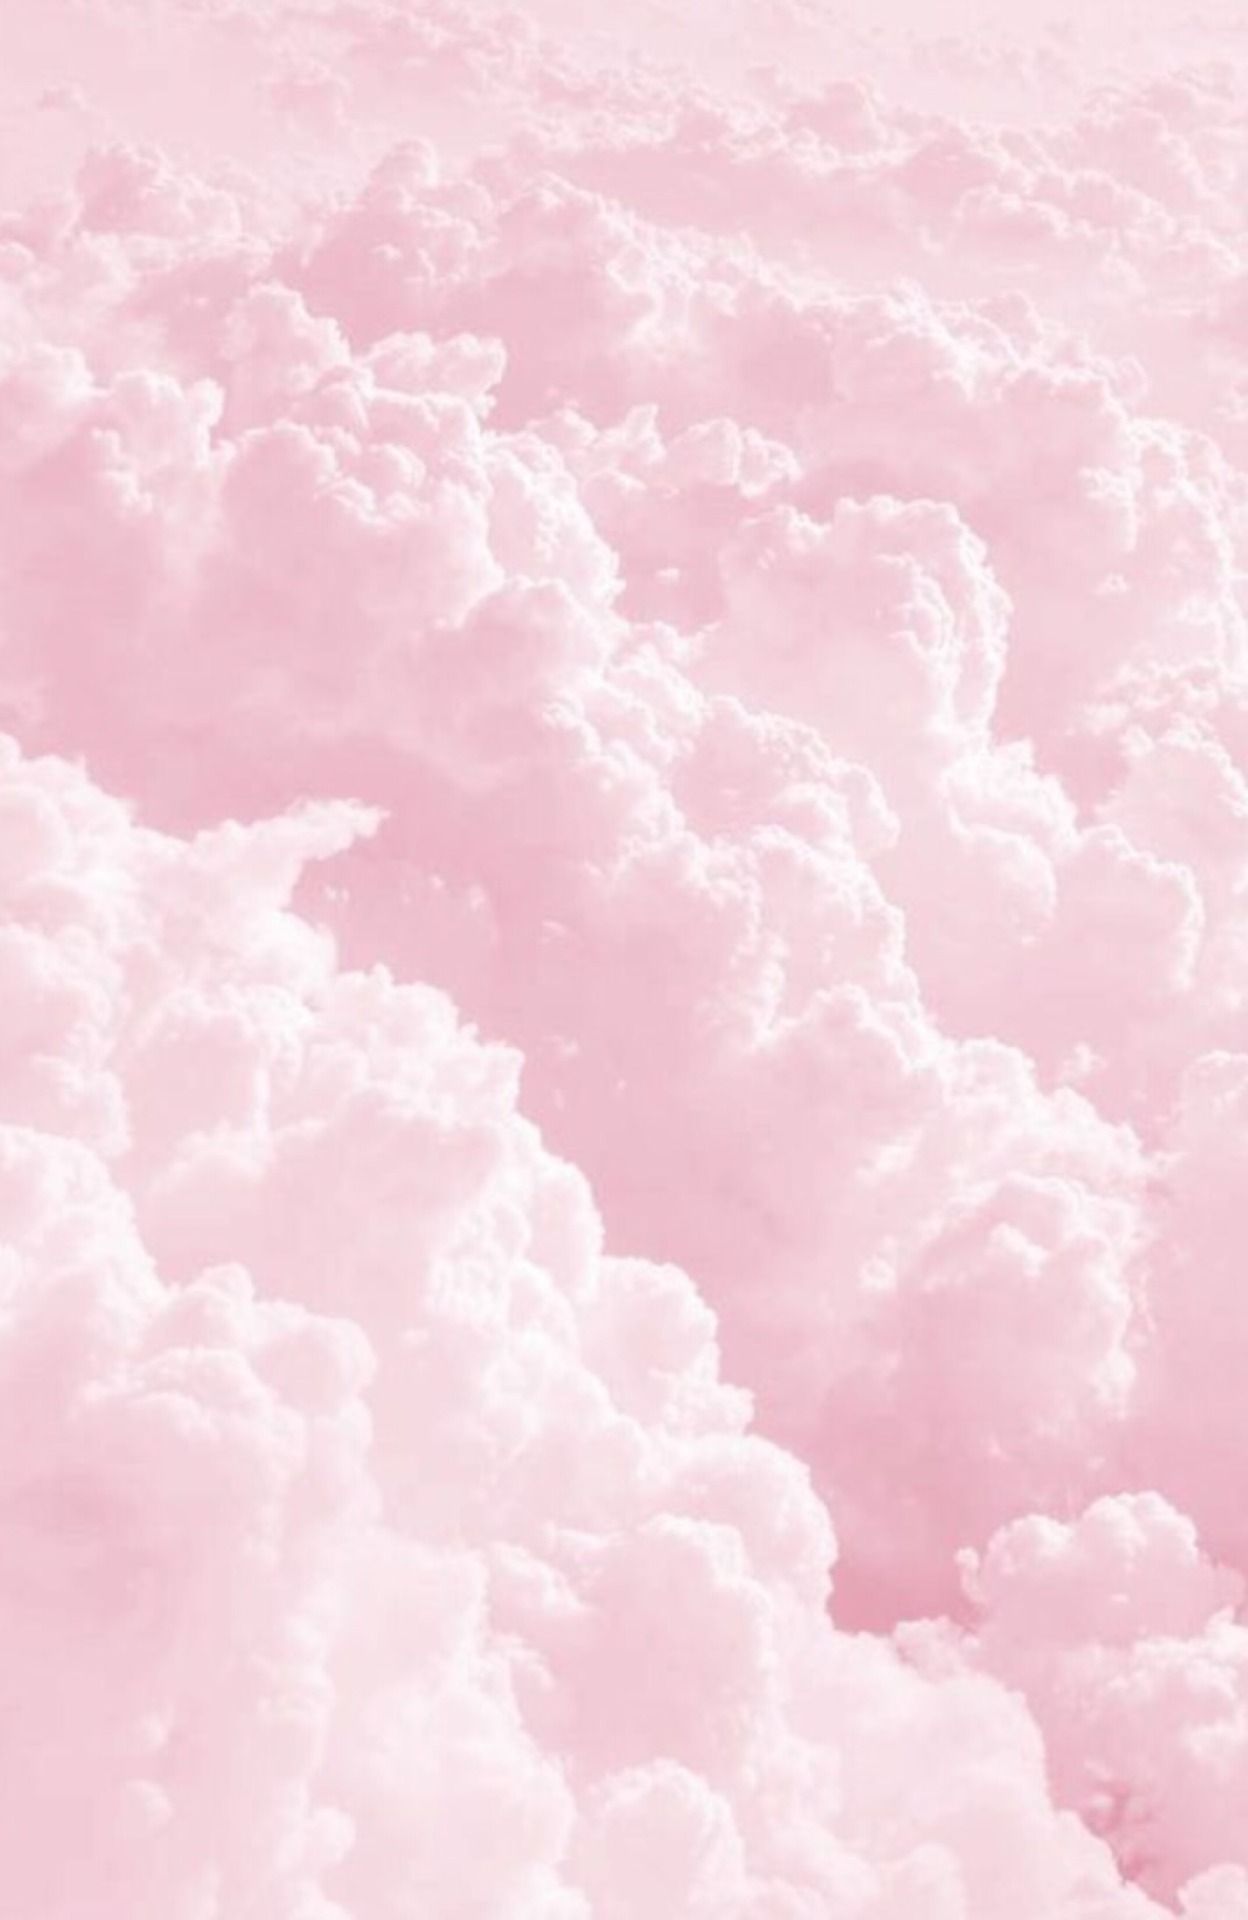 Pastel Pink Aesthetic PC Wallpaper. Pink clouds wallpaper, Pastel pink aesthetic, Pastel pink wallpaper